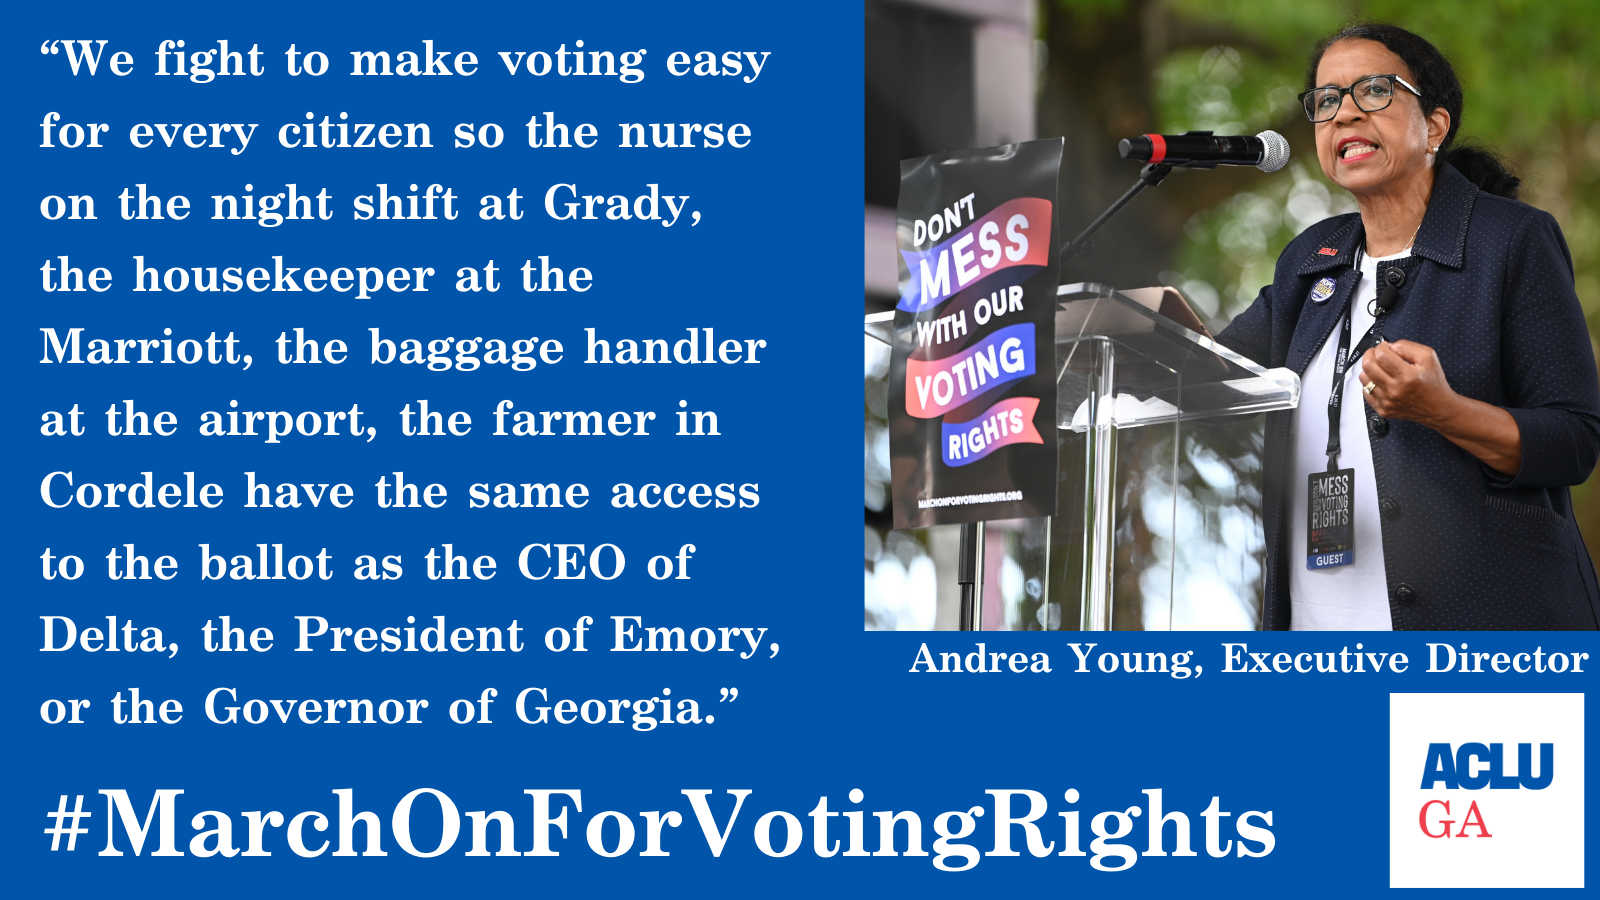 "We fight to make voting easy for every citizen so the nurse on the night shift at Grady, the housekeeper at the Marriott, the baggage handler at the airport, the farmer in Cordele have the same access to the ballot as the CEO of Delta, the President of Emory, or the Governor of Georgia." Andrea Young, Executive Director #MarchOnForVotingRights